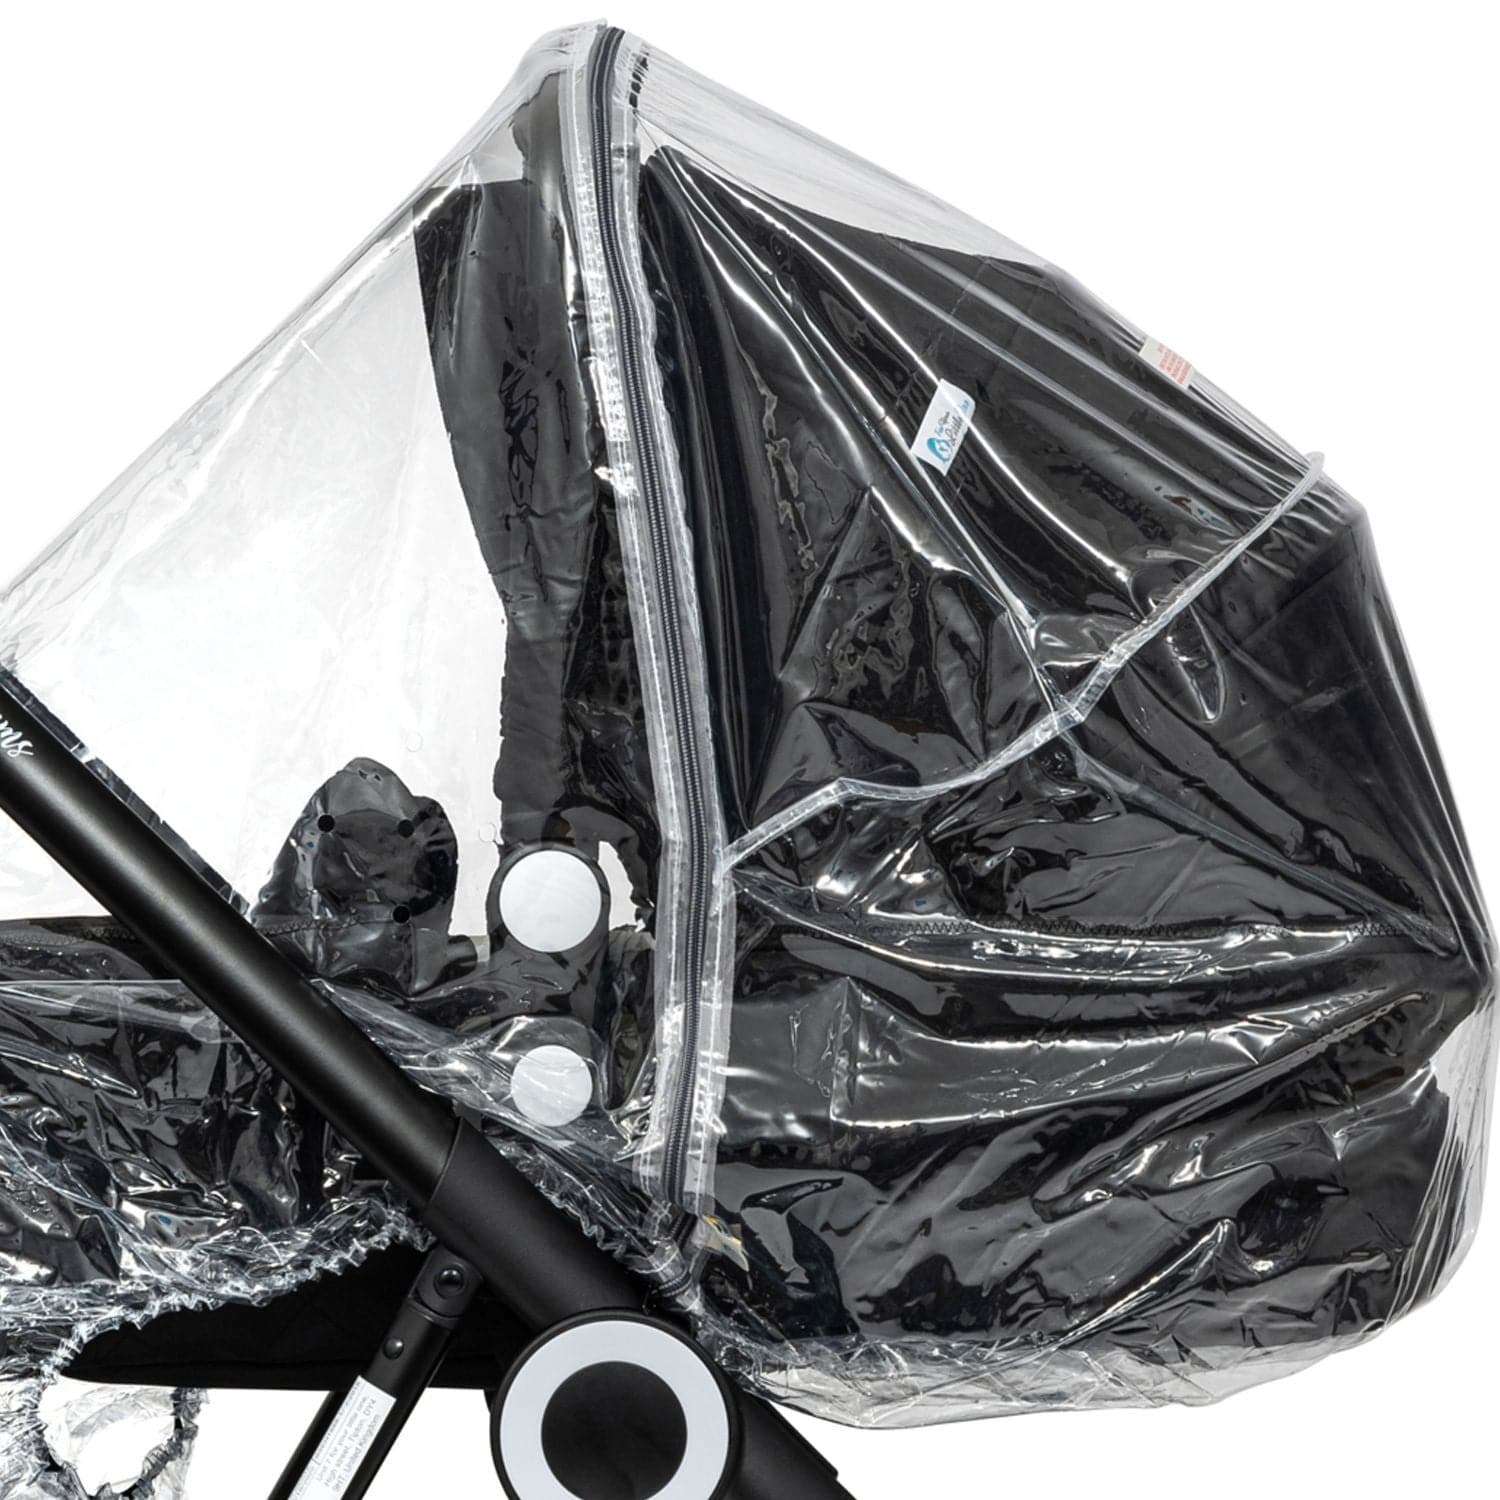 Carrycot Raincover Compatible With Cam - Fits All Models -  | For Your Little One